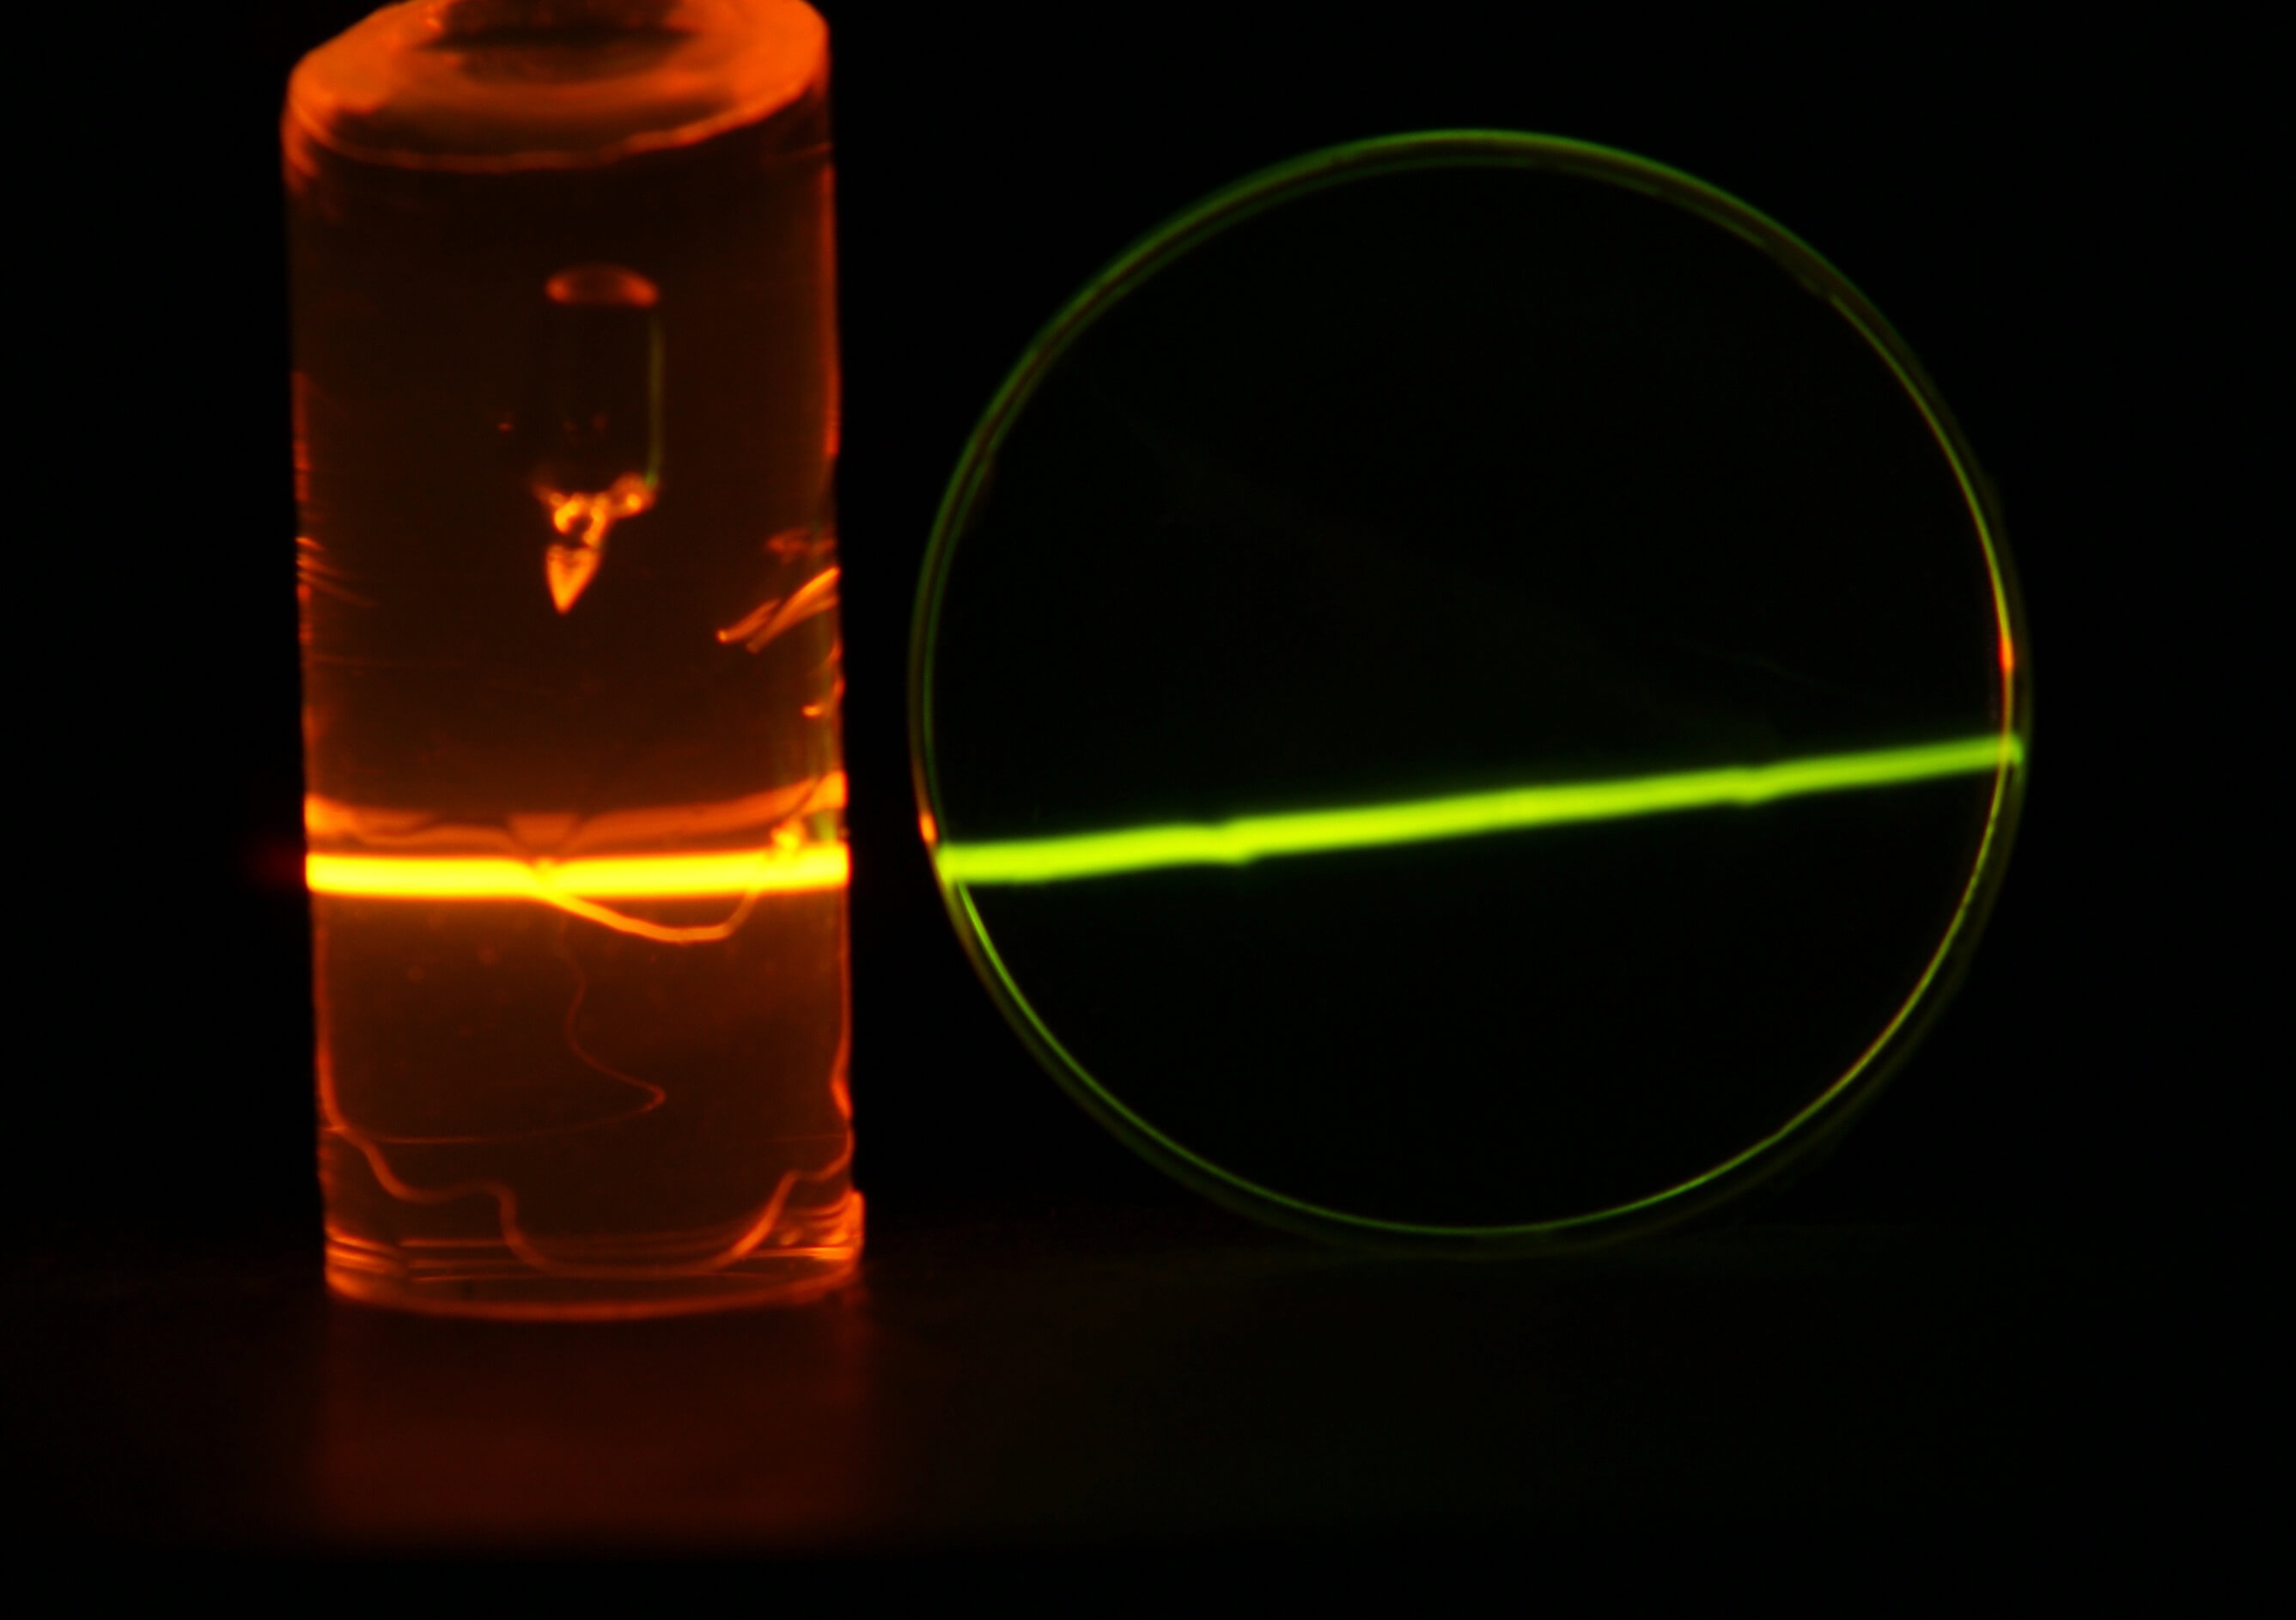 An invisible infrared laser beam, coming from the left, is incident on two PMMA upconverter samples. In the upconverter samples the laser ray is visible to the naked eye due to upconversion.